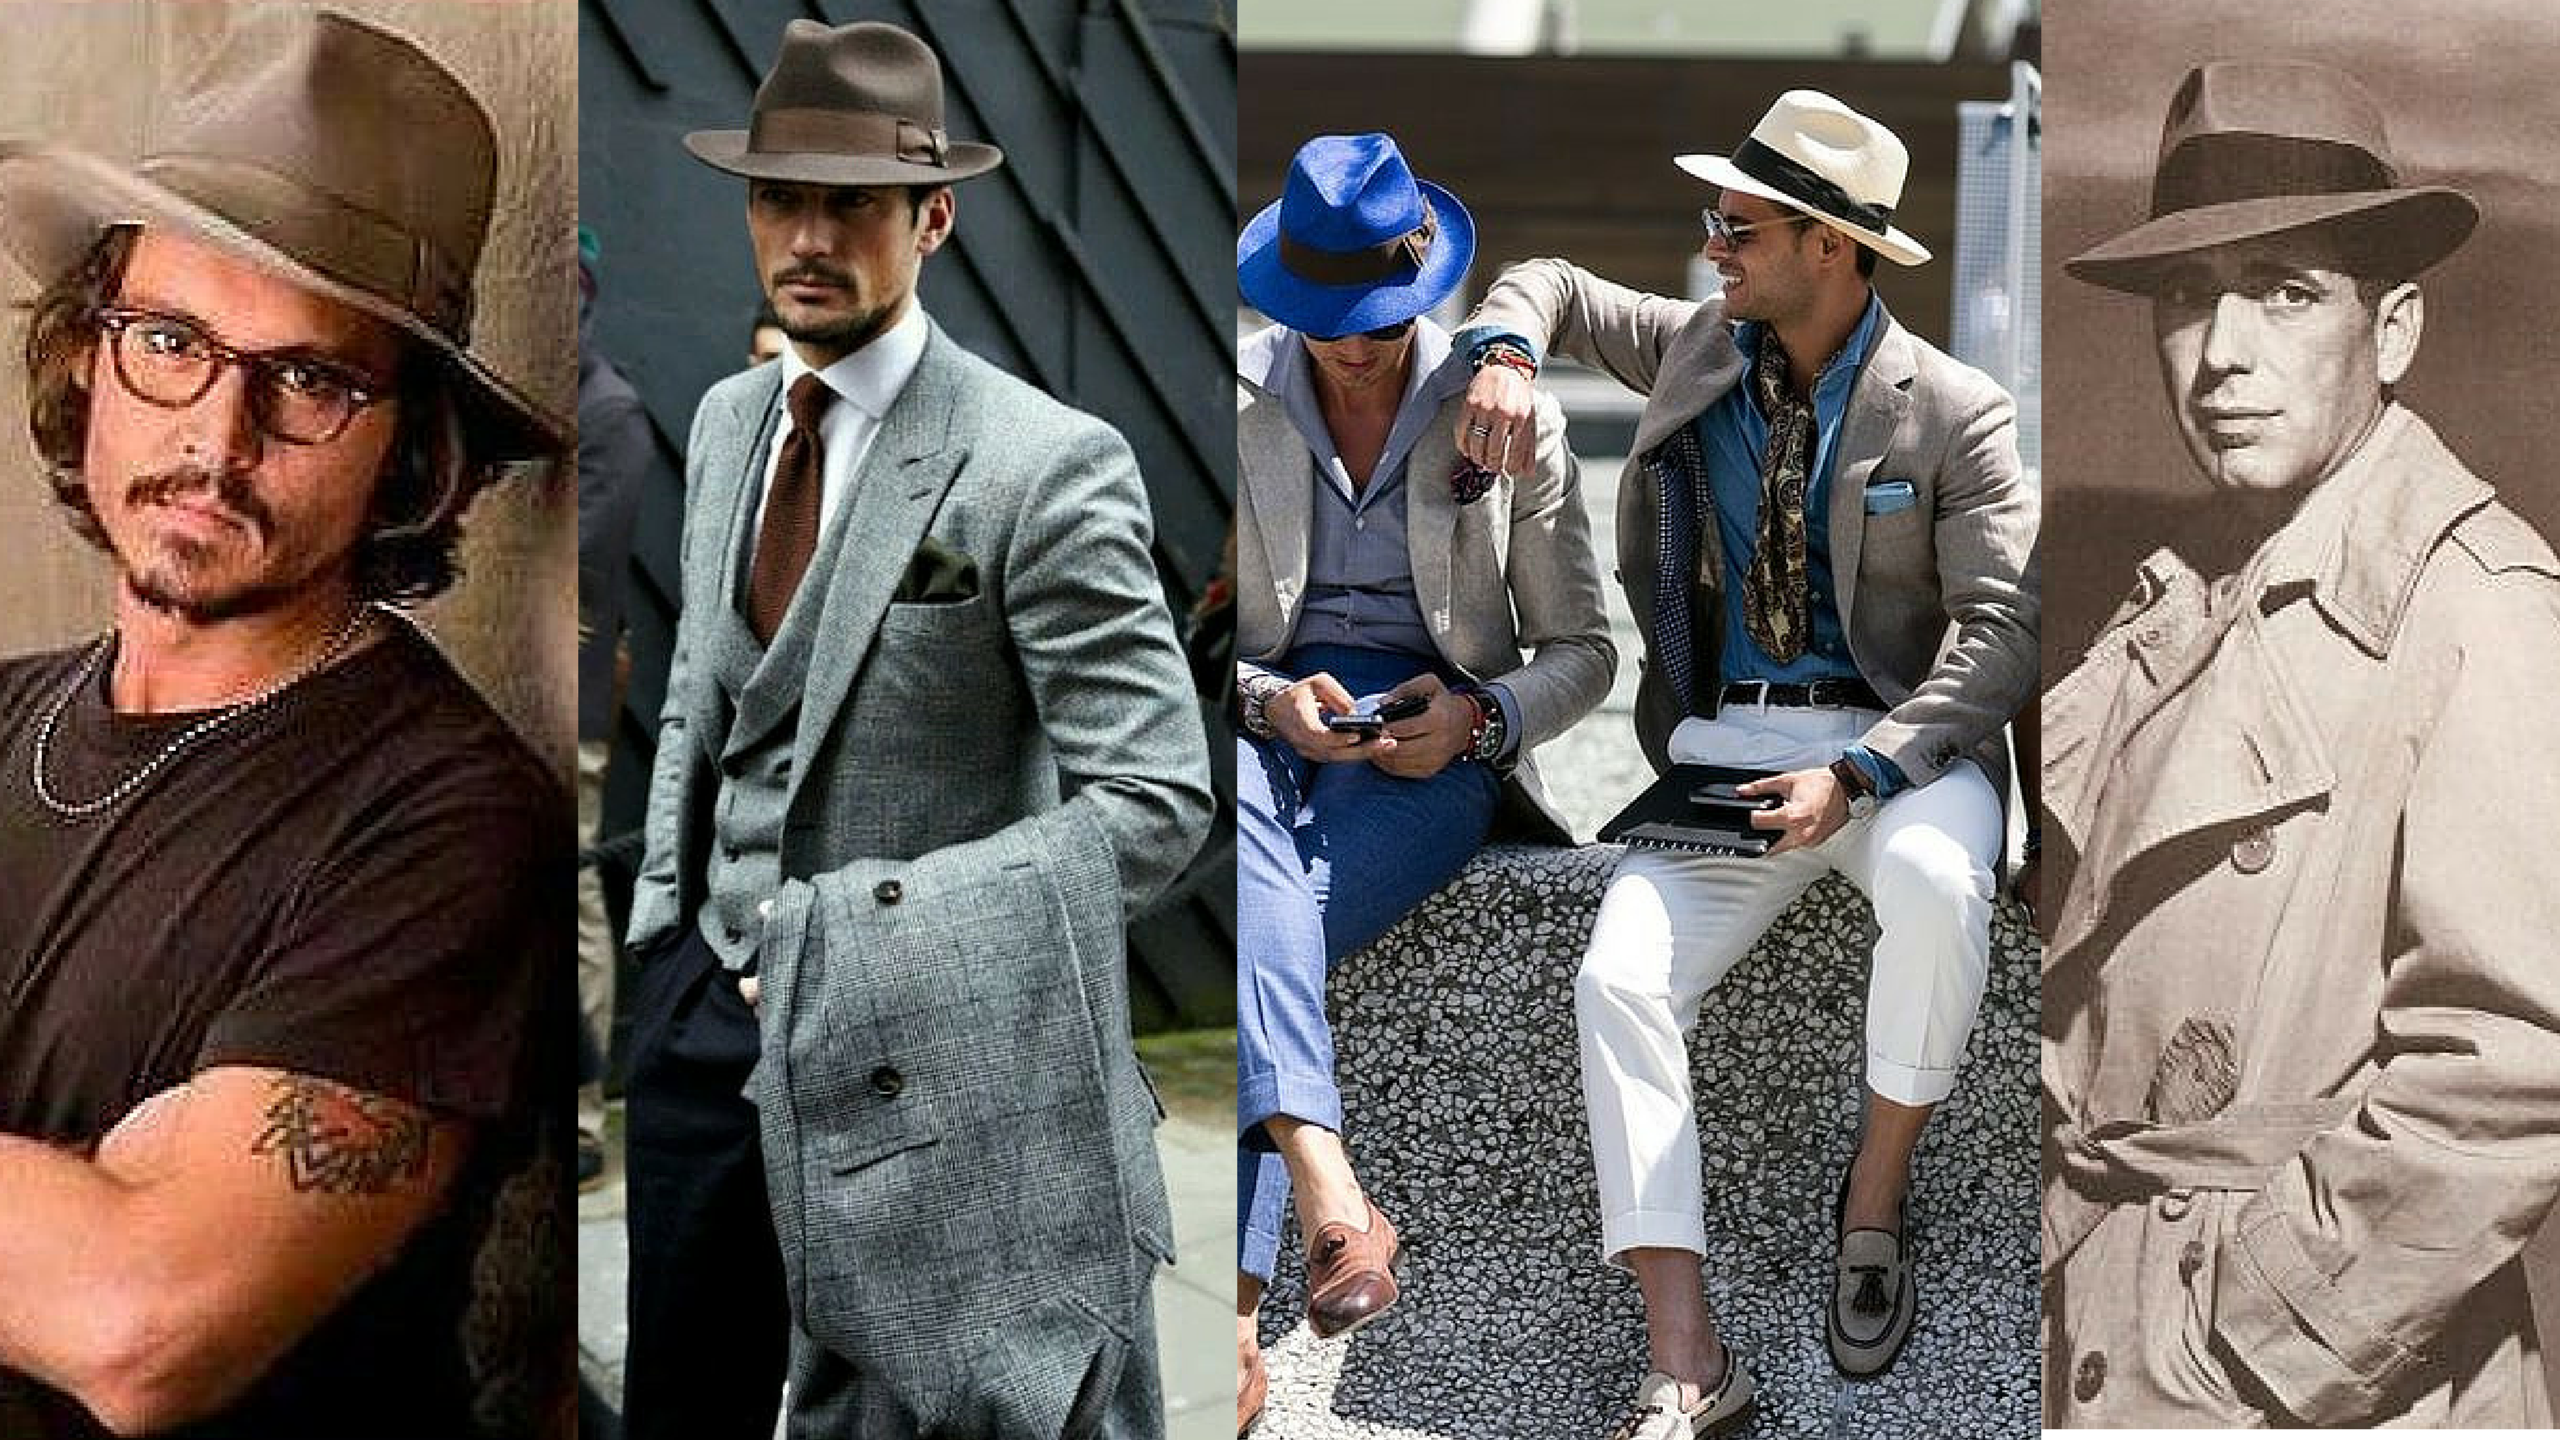 Men's Fitted Hats: Top Off Your Sporty Style with a Men's Fitted